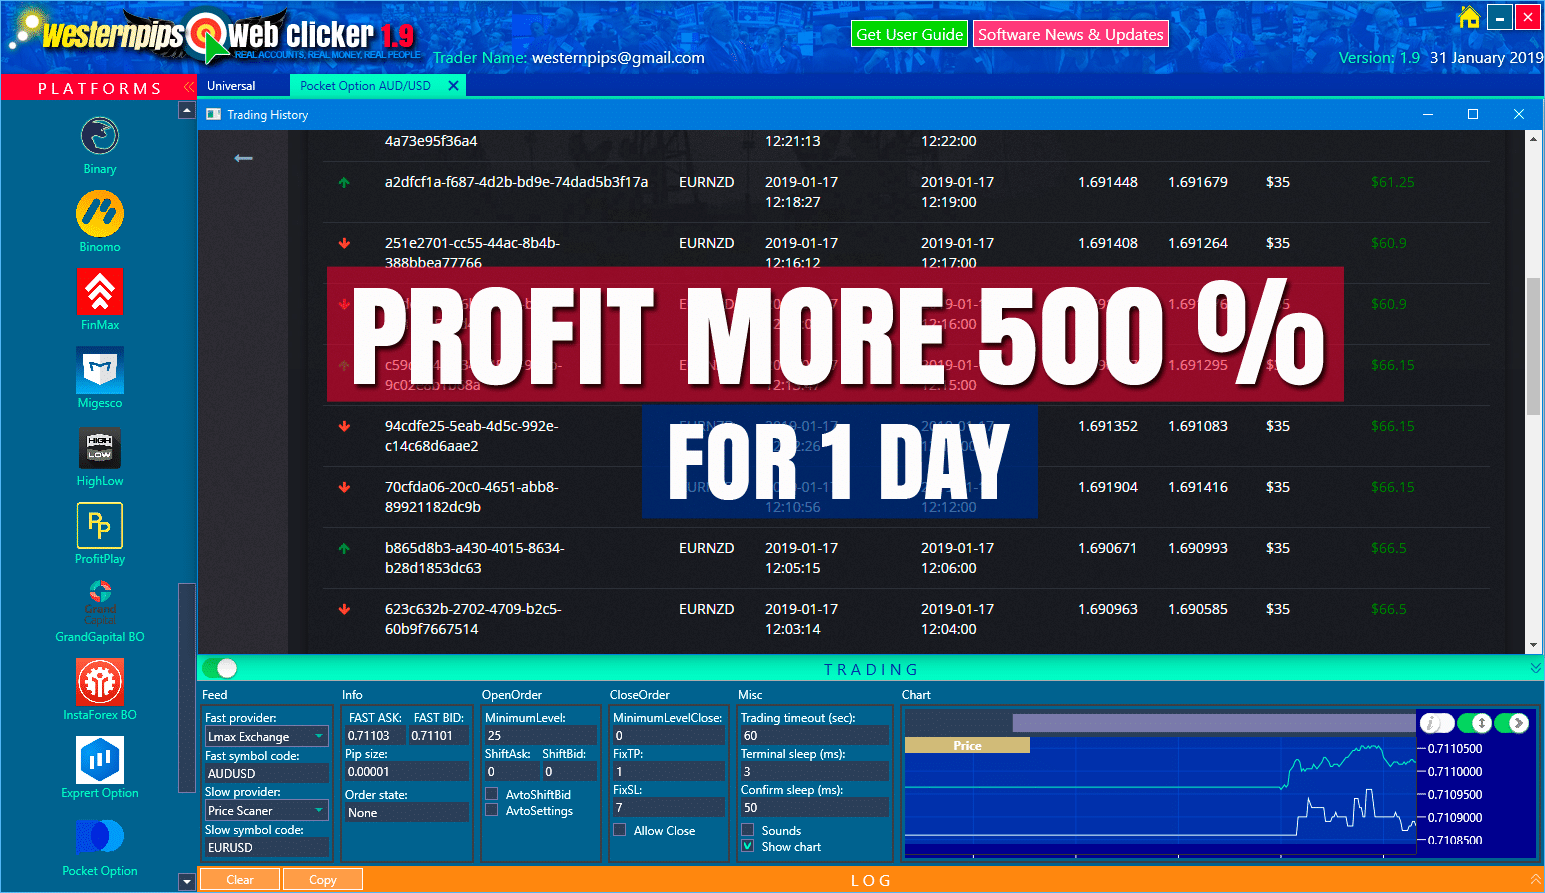 text "Profit more 500% for 1 day" on the  screenshot 